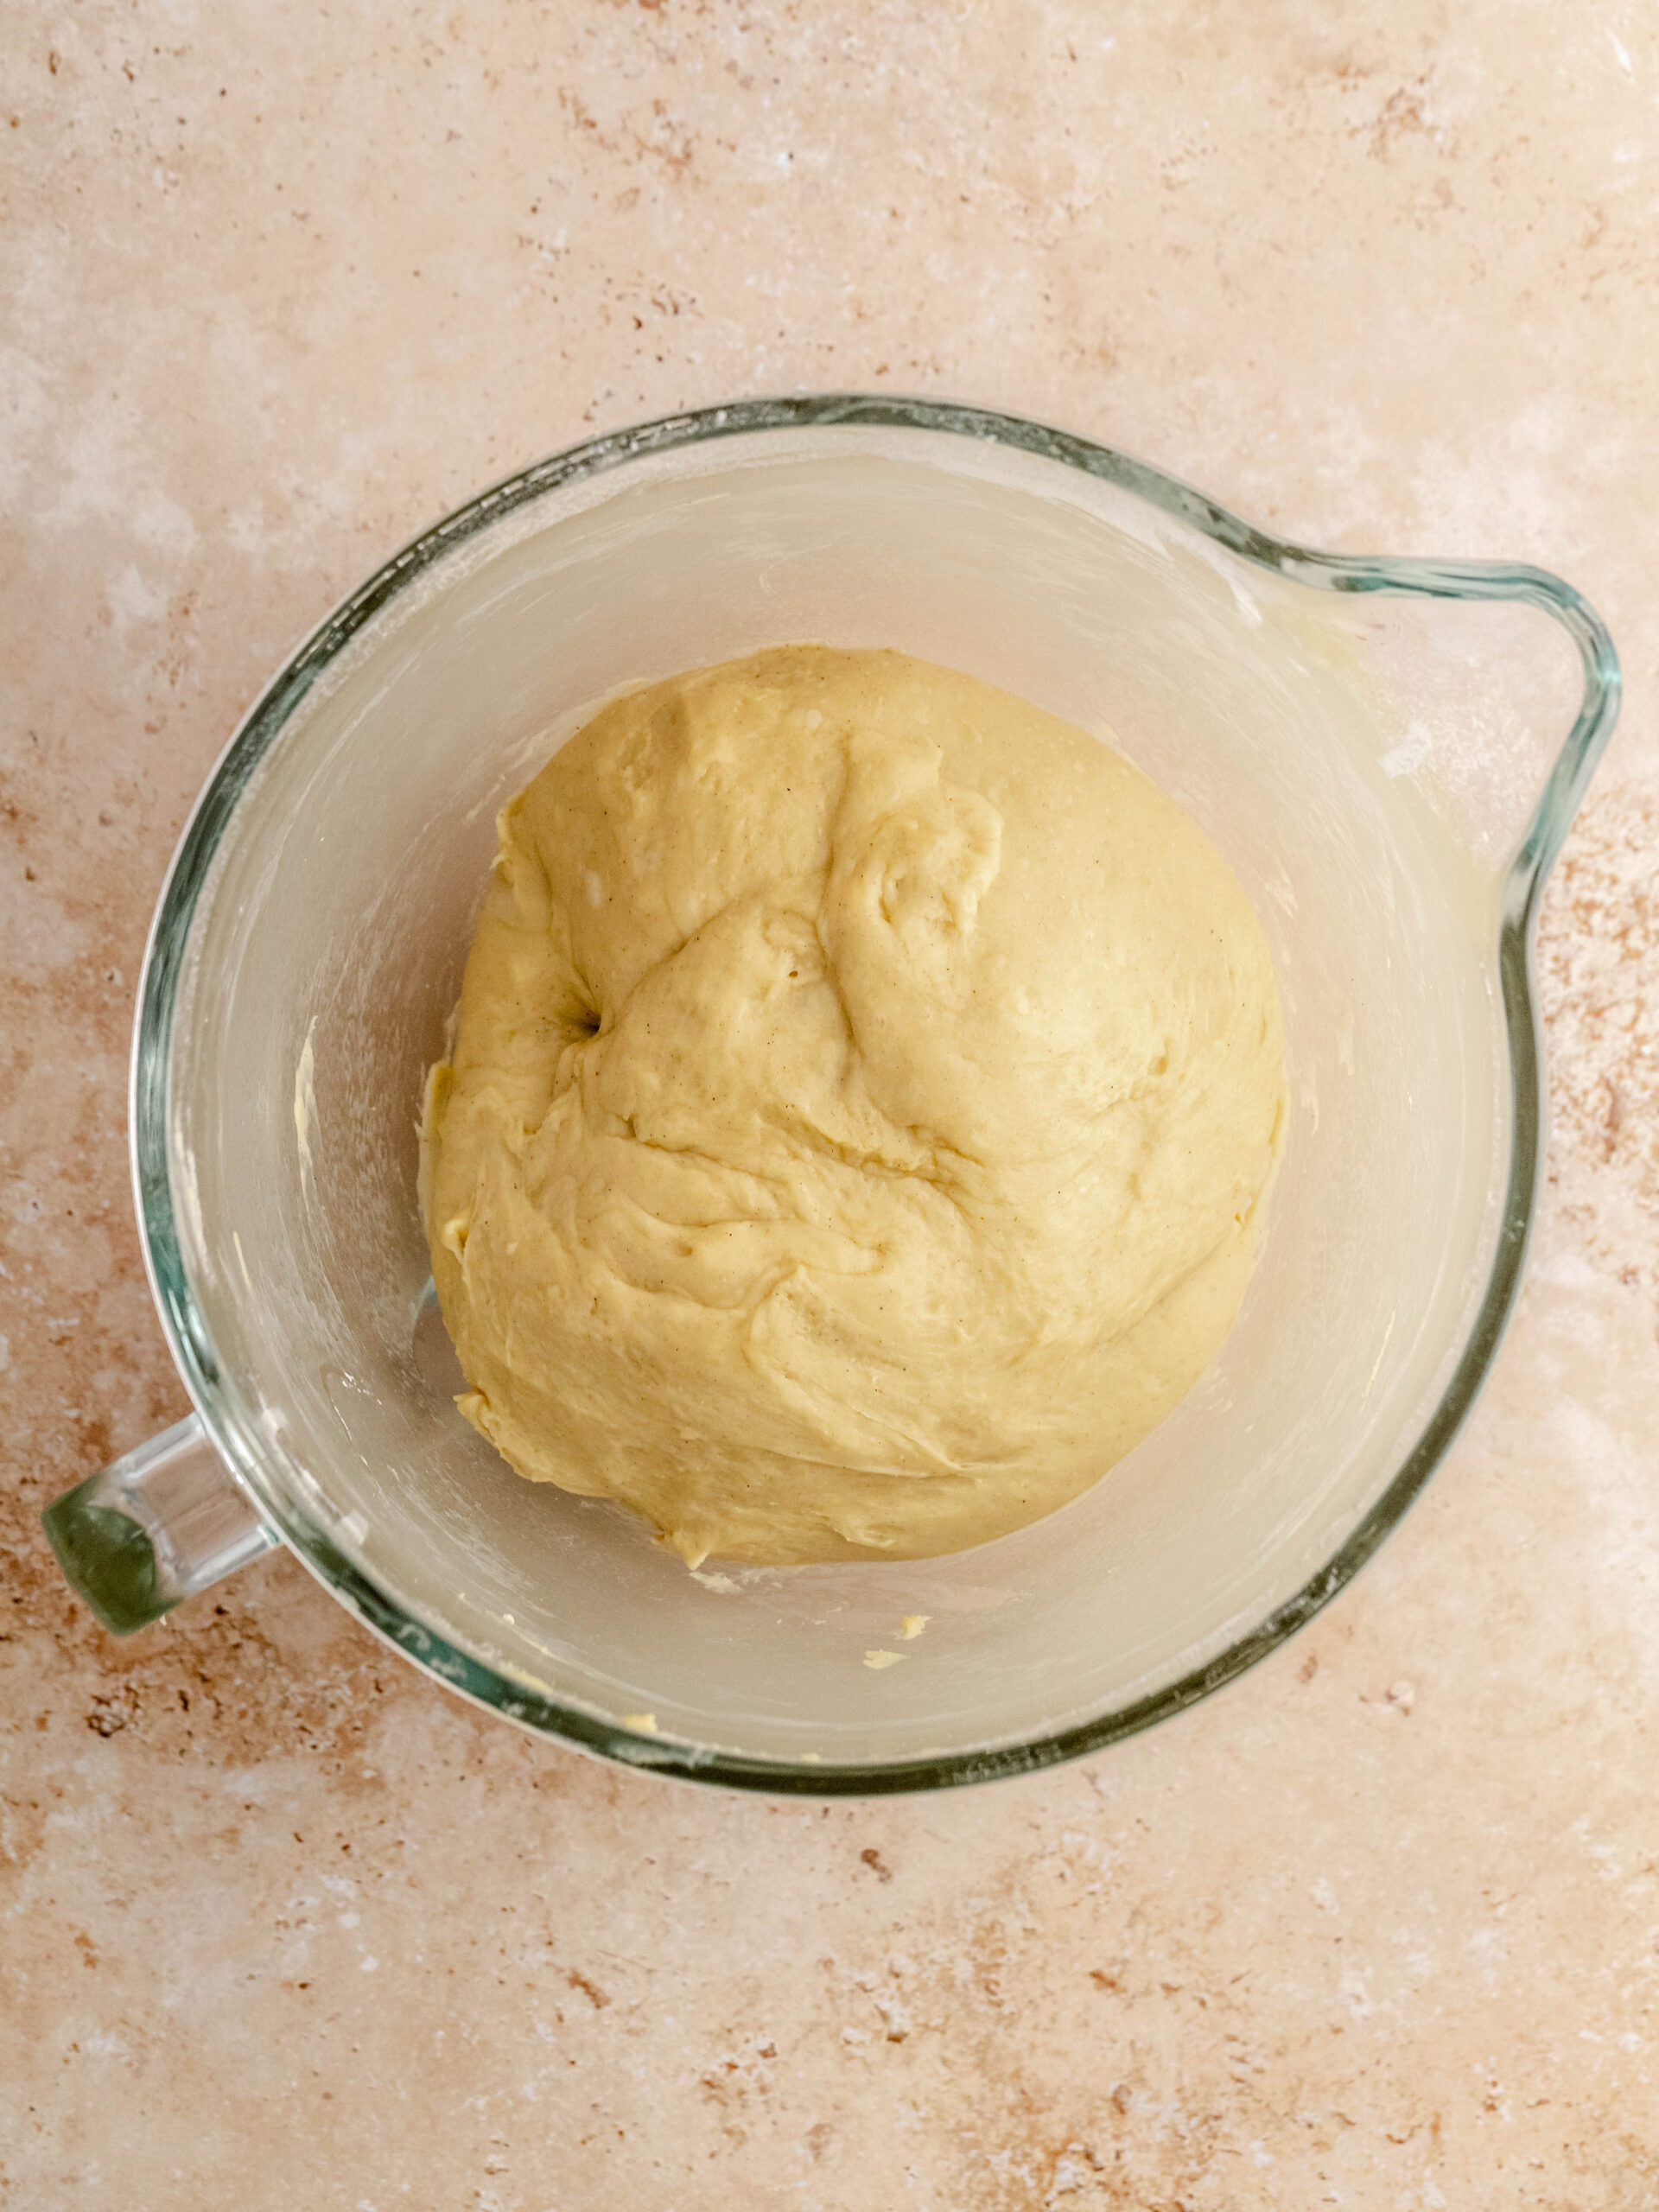 Dough in a bowl before it's proofed